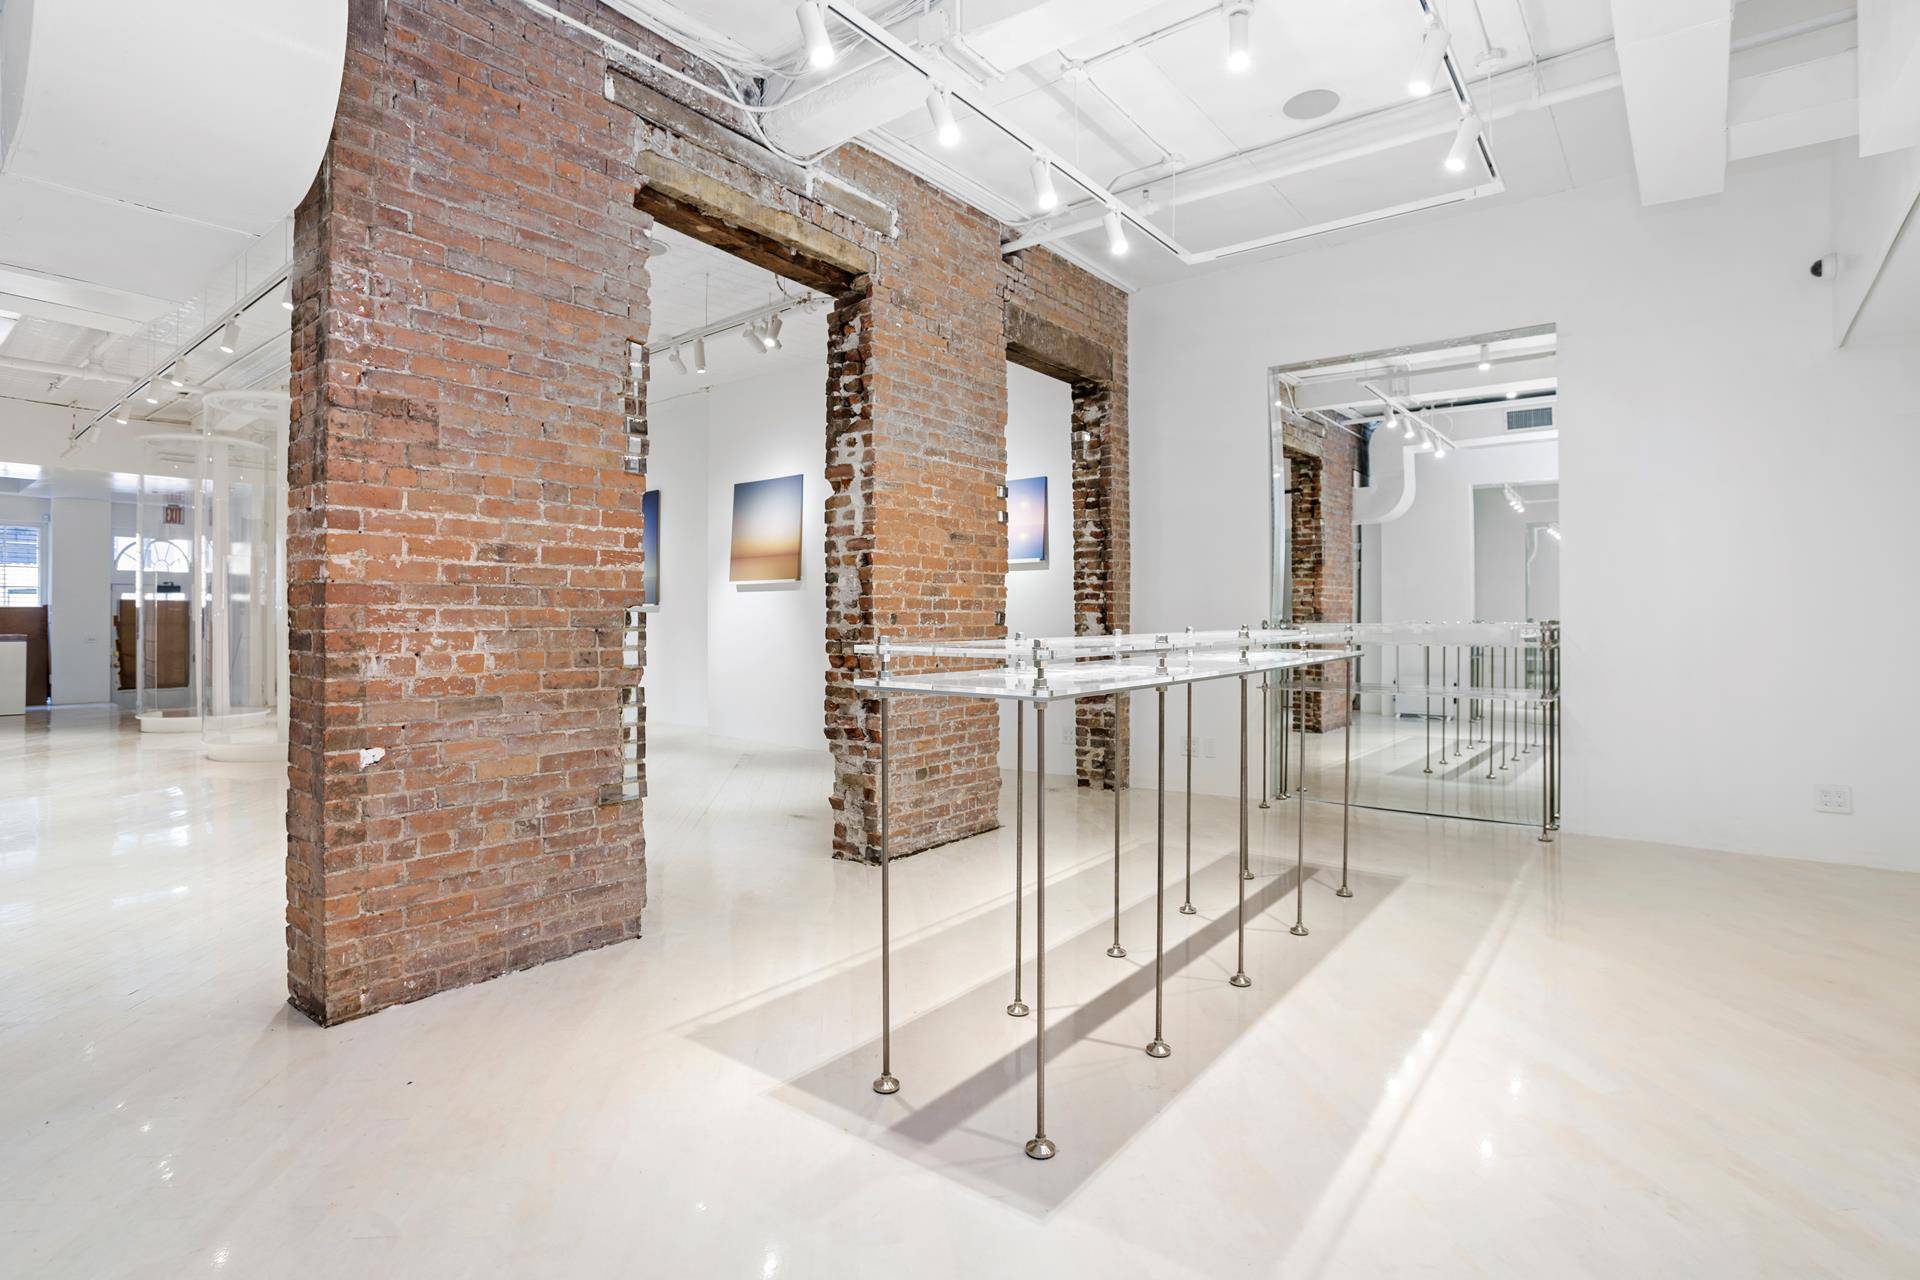 19 Howard Street is a handsome Greek revival style townhouse situated on one of the trendiest block for avant garde fashion in SoHo, neighors including Rick Owen and Opening ceremony ...